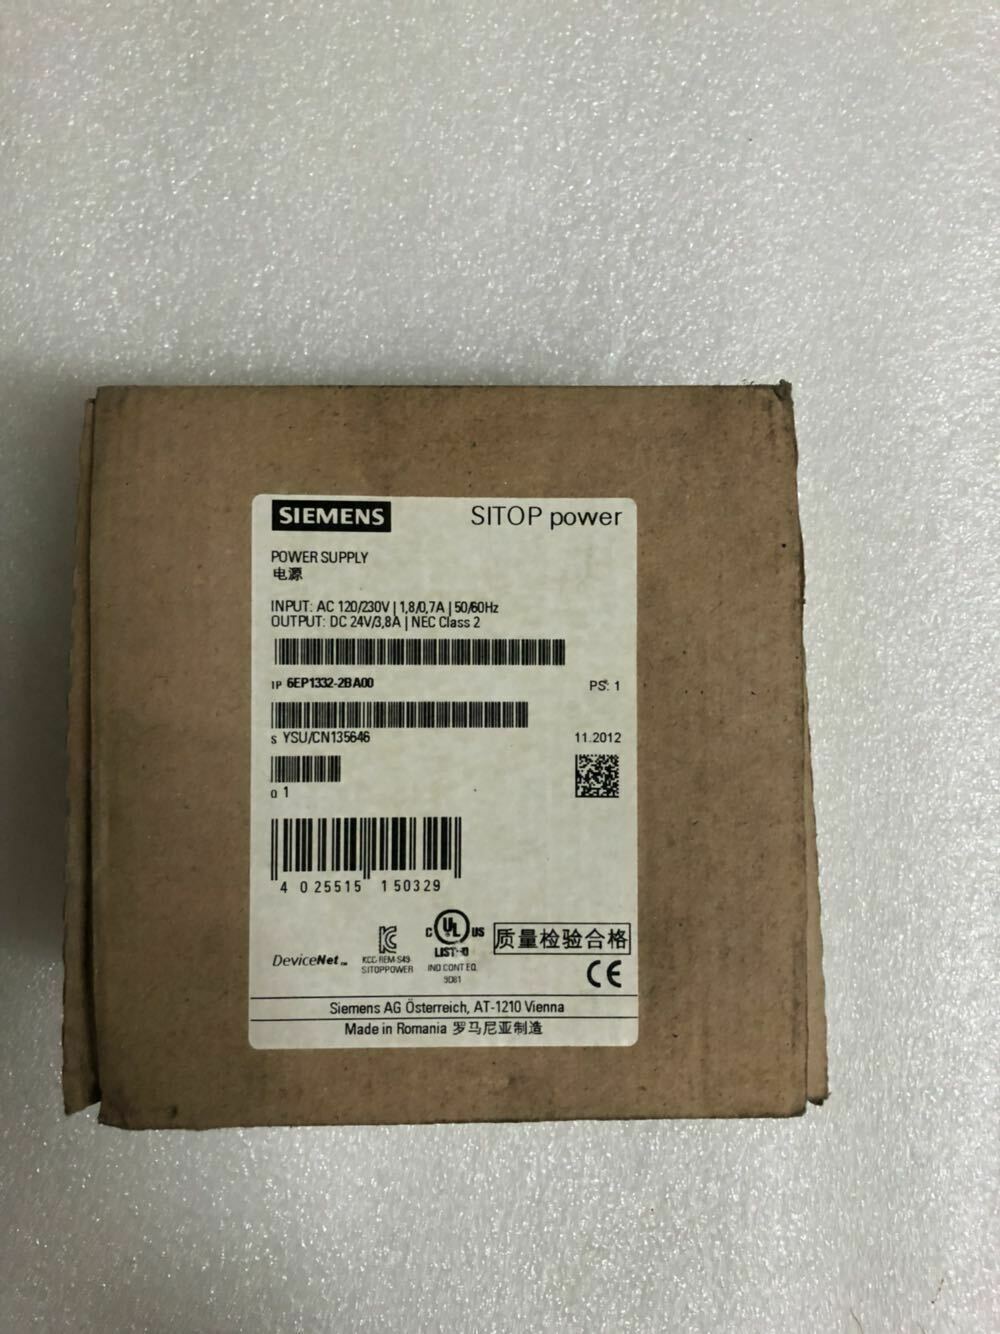 new ONE  Siemens SITOP POWER 4 6EP1332-2BA00 6EP1 332-2BA00 FAST SHIP